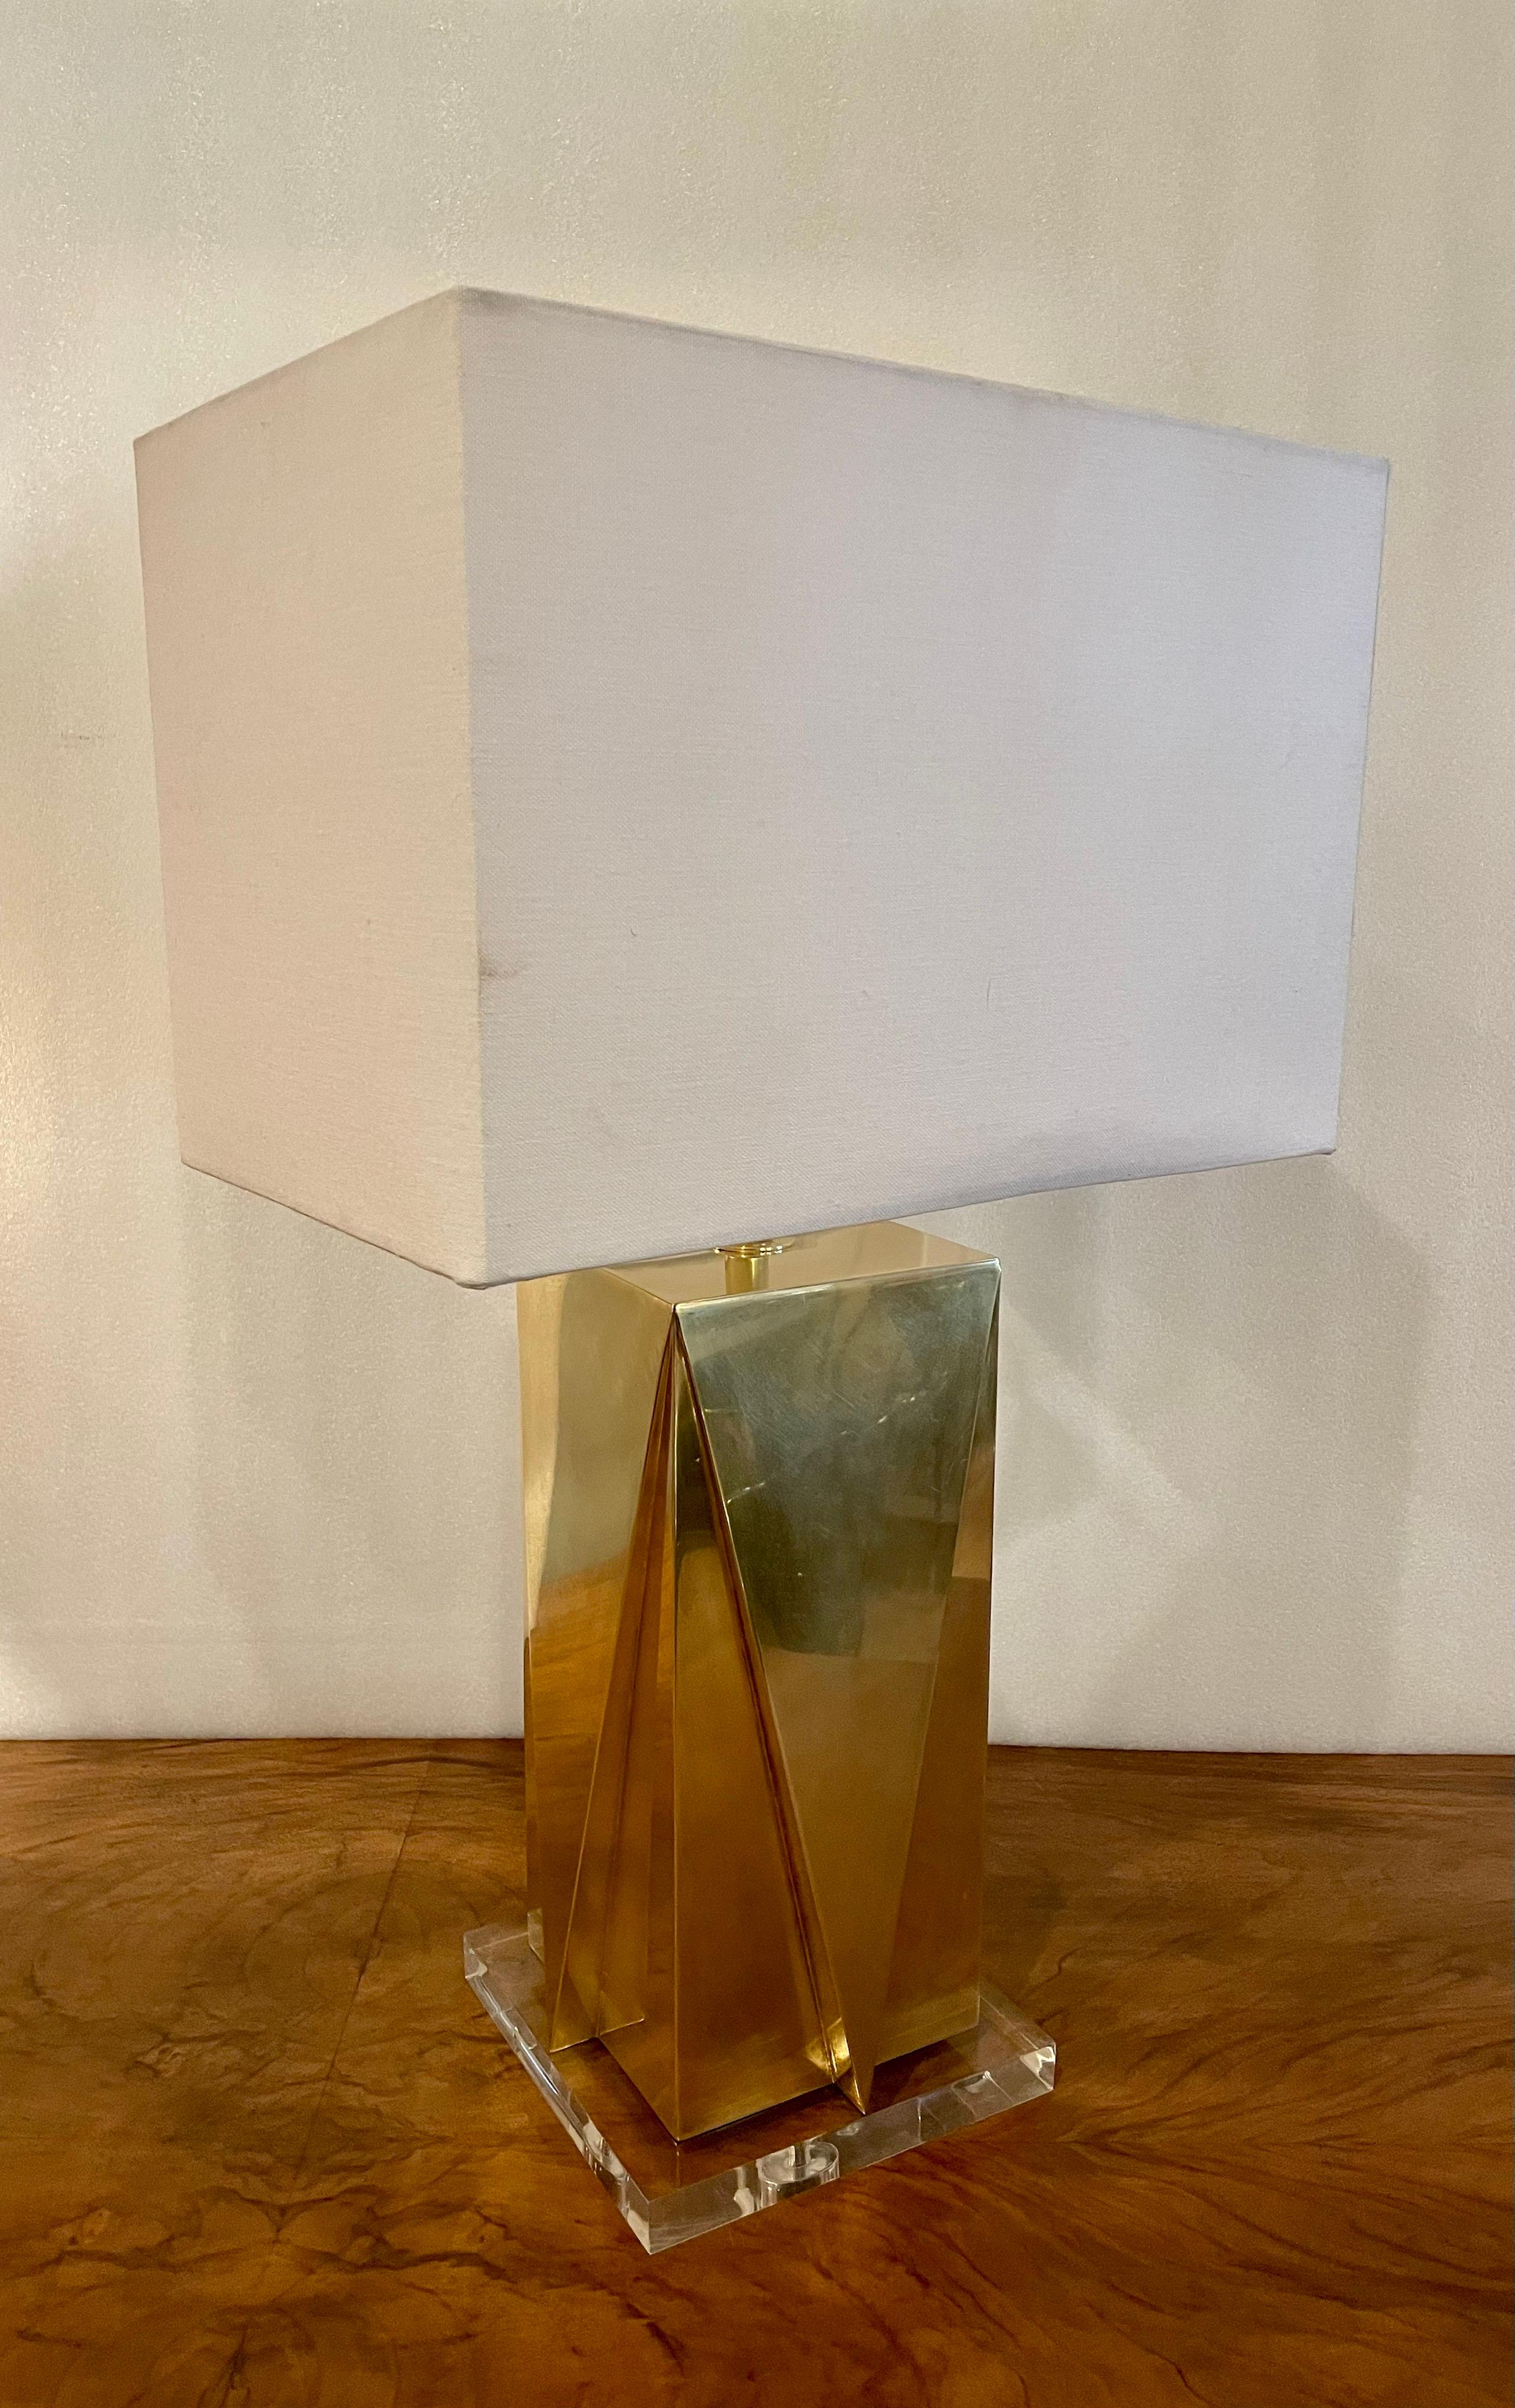 Striking beautiful polished brass table lamp sitting on a solid lucite base, circa 1960s freshly rewired, and polished we put a new lampshade, 16